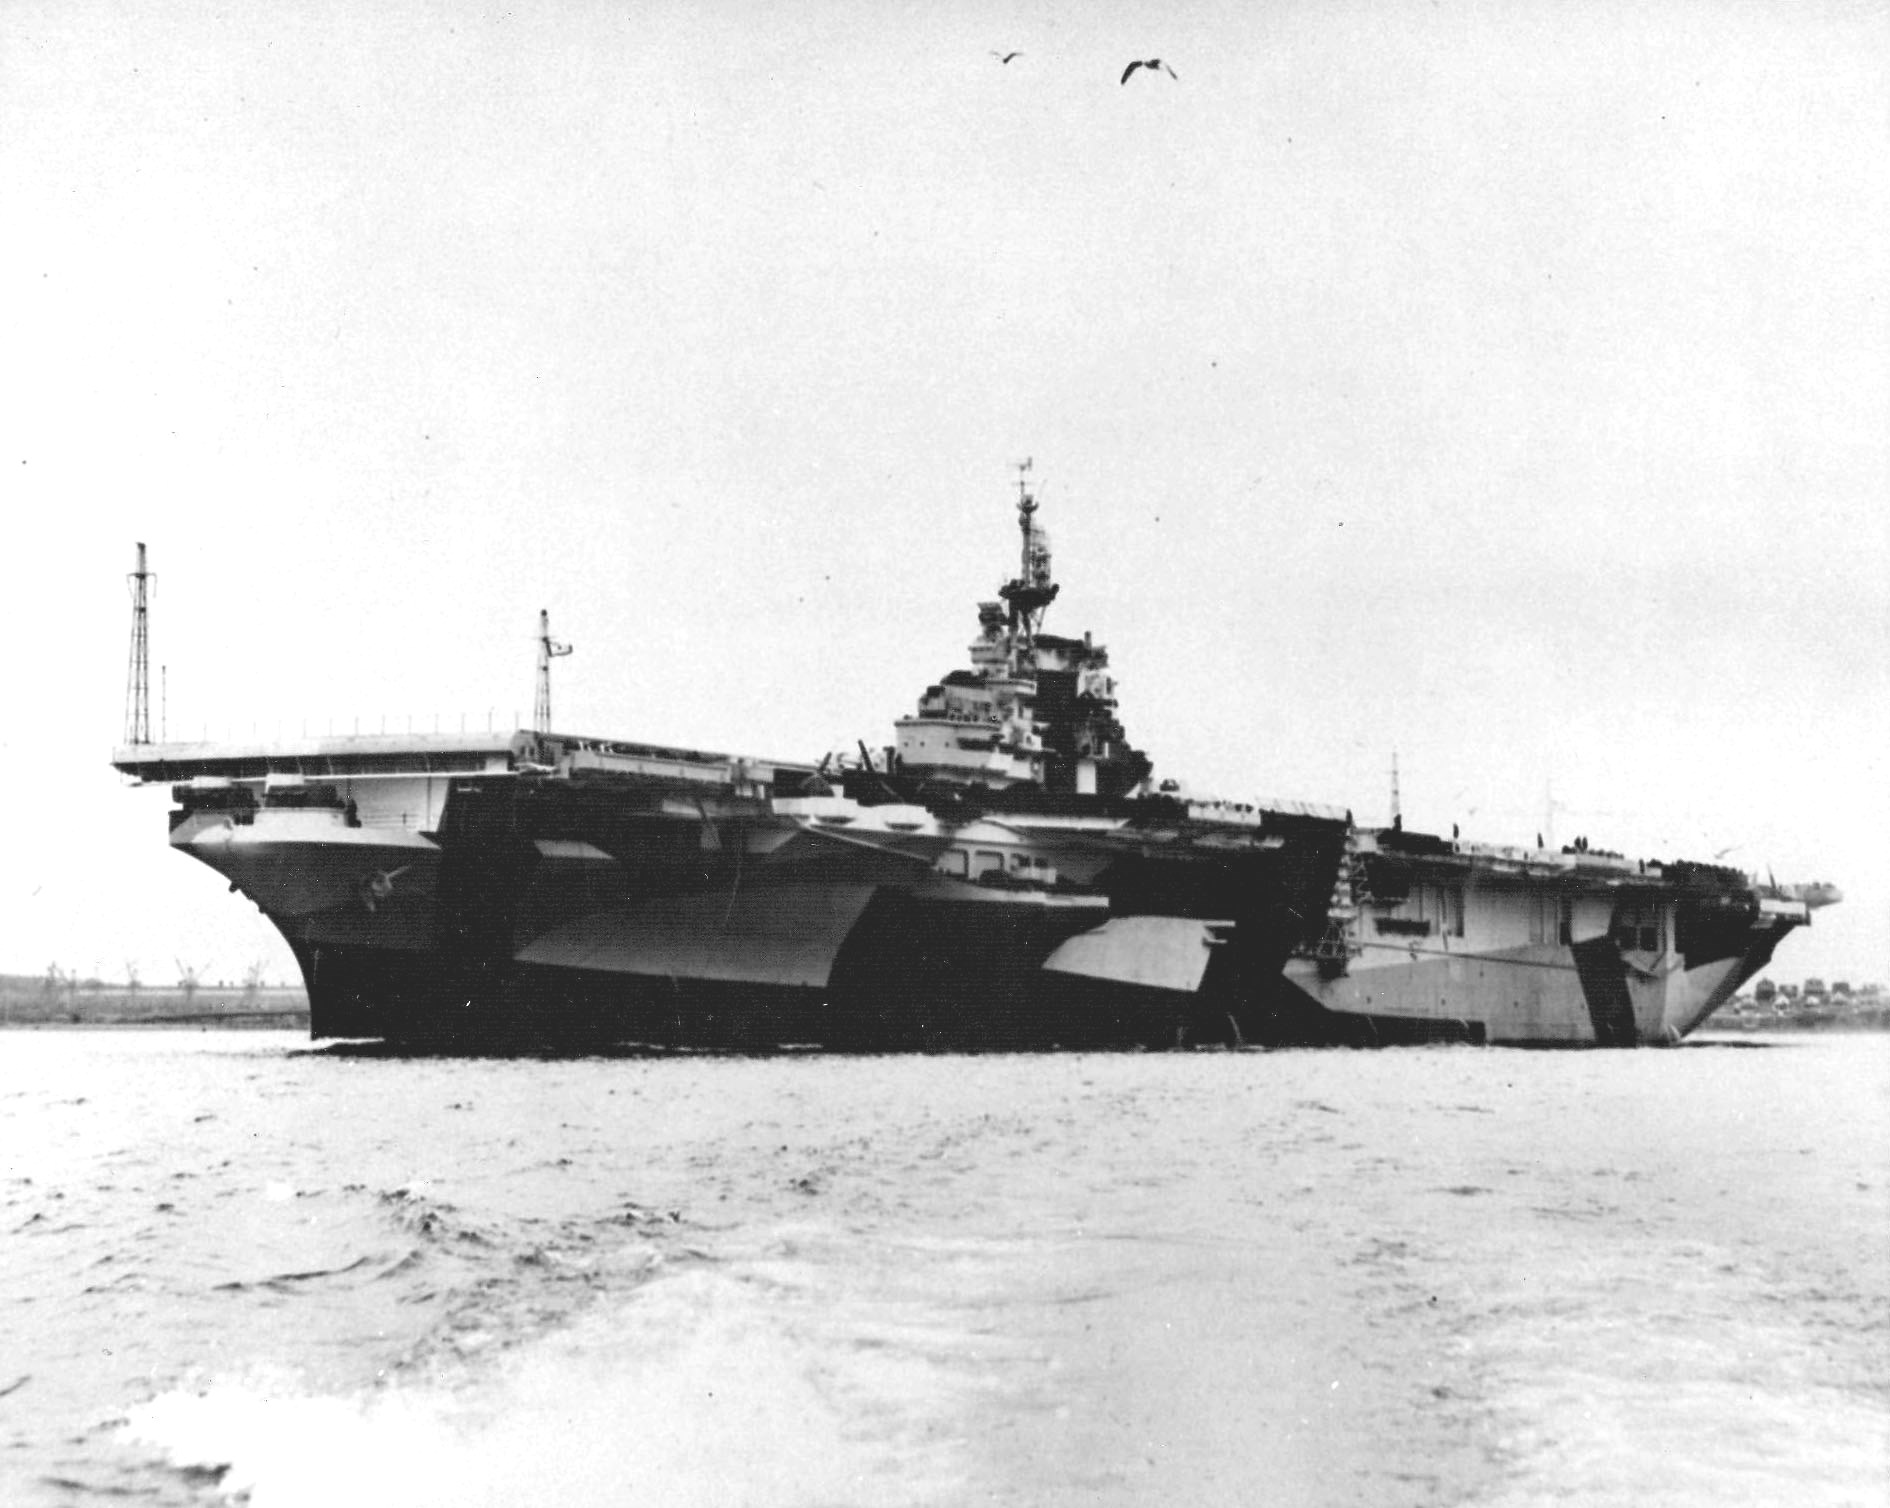 Essex-class Aircraft Carrier Hancock off Quincy, Massachusetts, United States, 14 Apr 1944, the day before her commissioning.